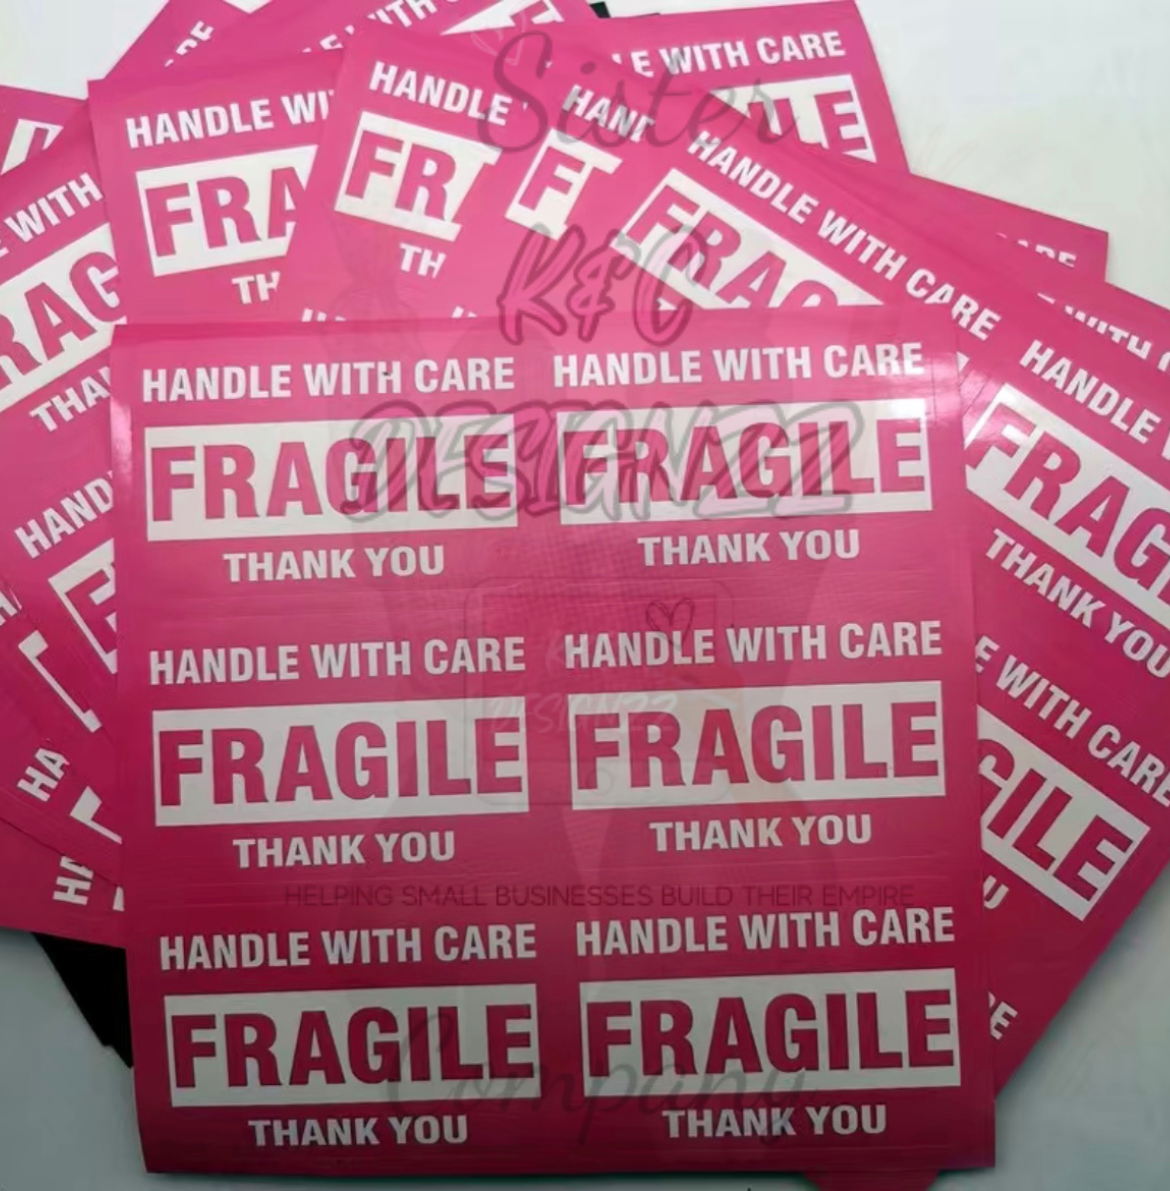 CarefulTouch Rectangular Stickers: Black, Pink, Hot Pink, and White Edition